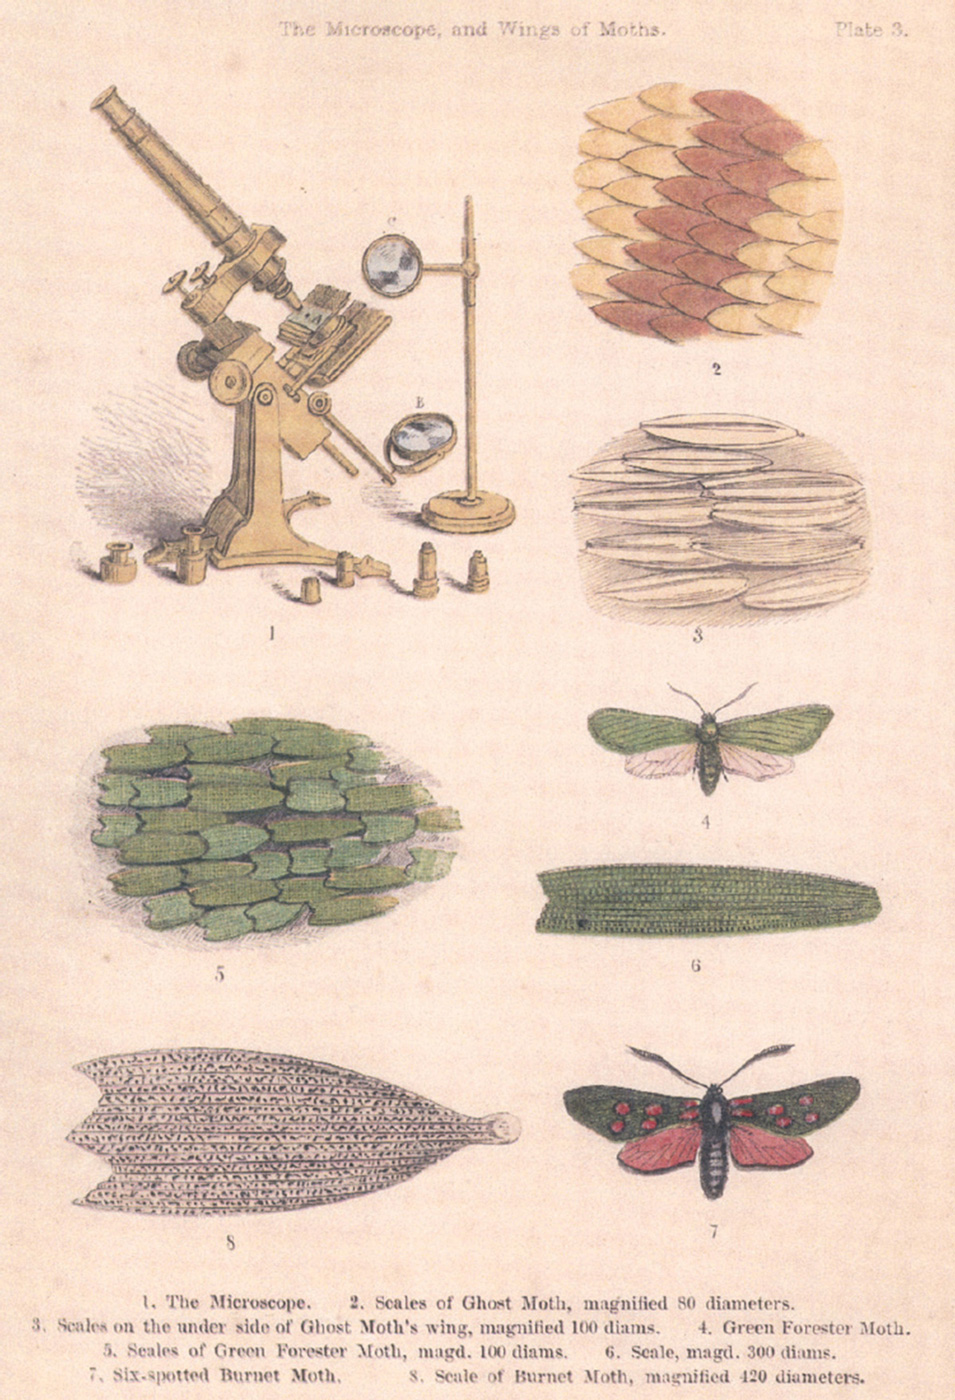 An illustration from Mary Ward’s eighteen fifty eight book “A World of Wonders Revealed by the Microscope.”